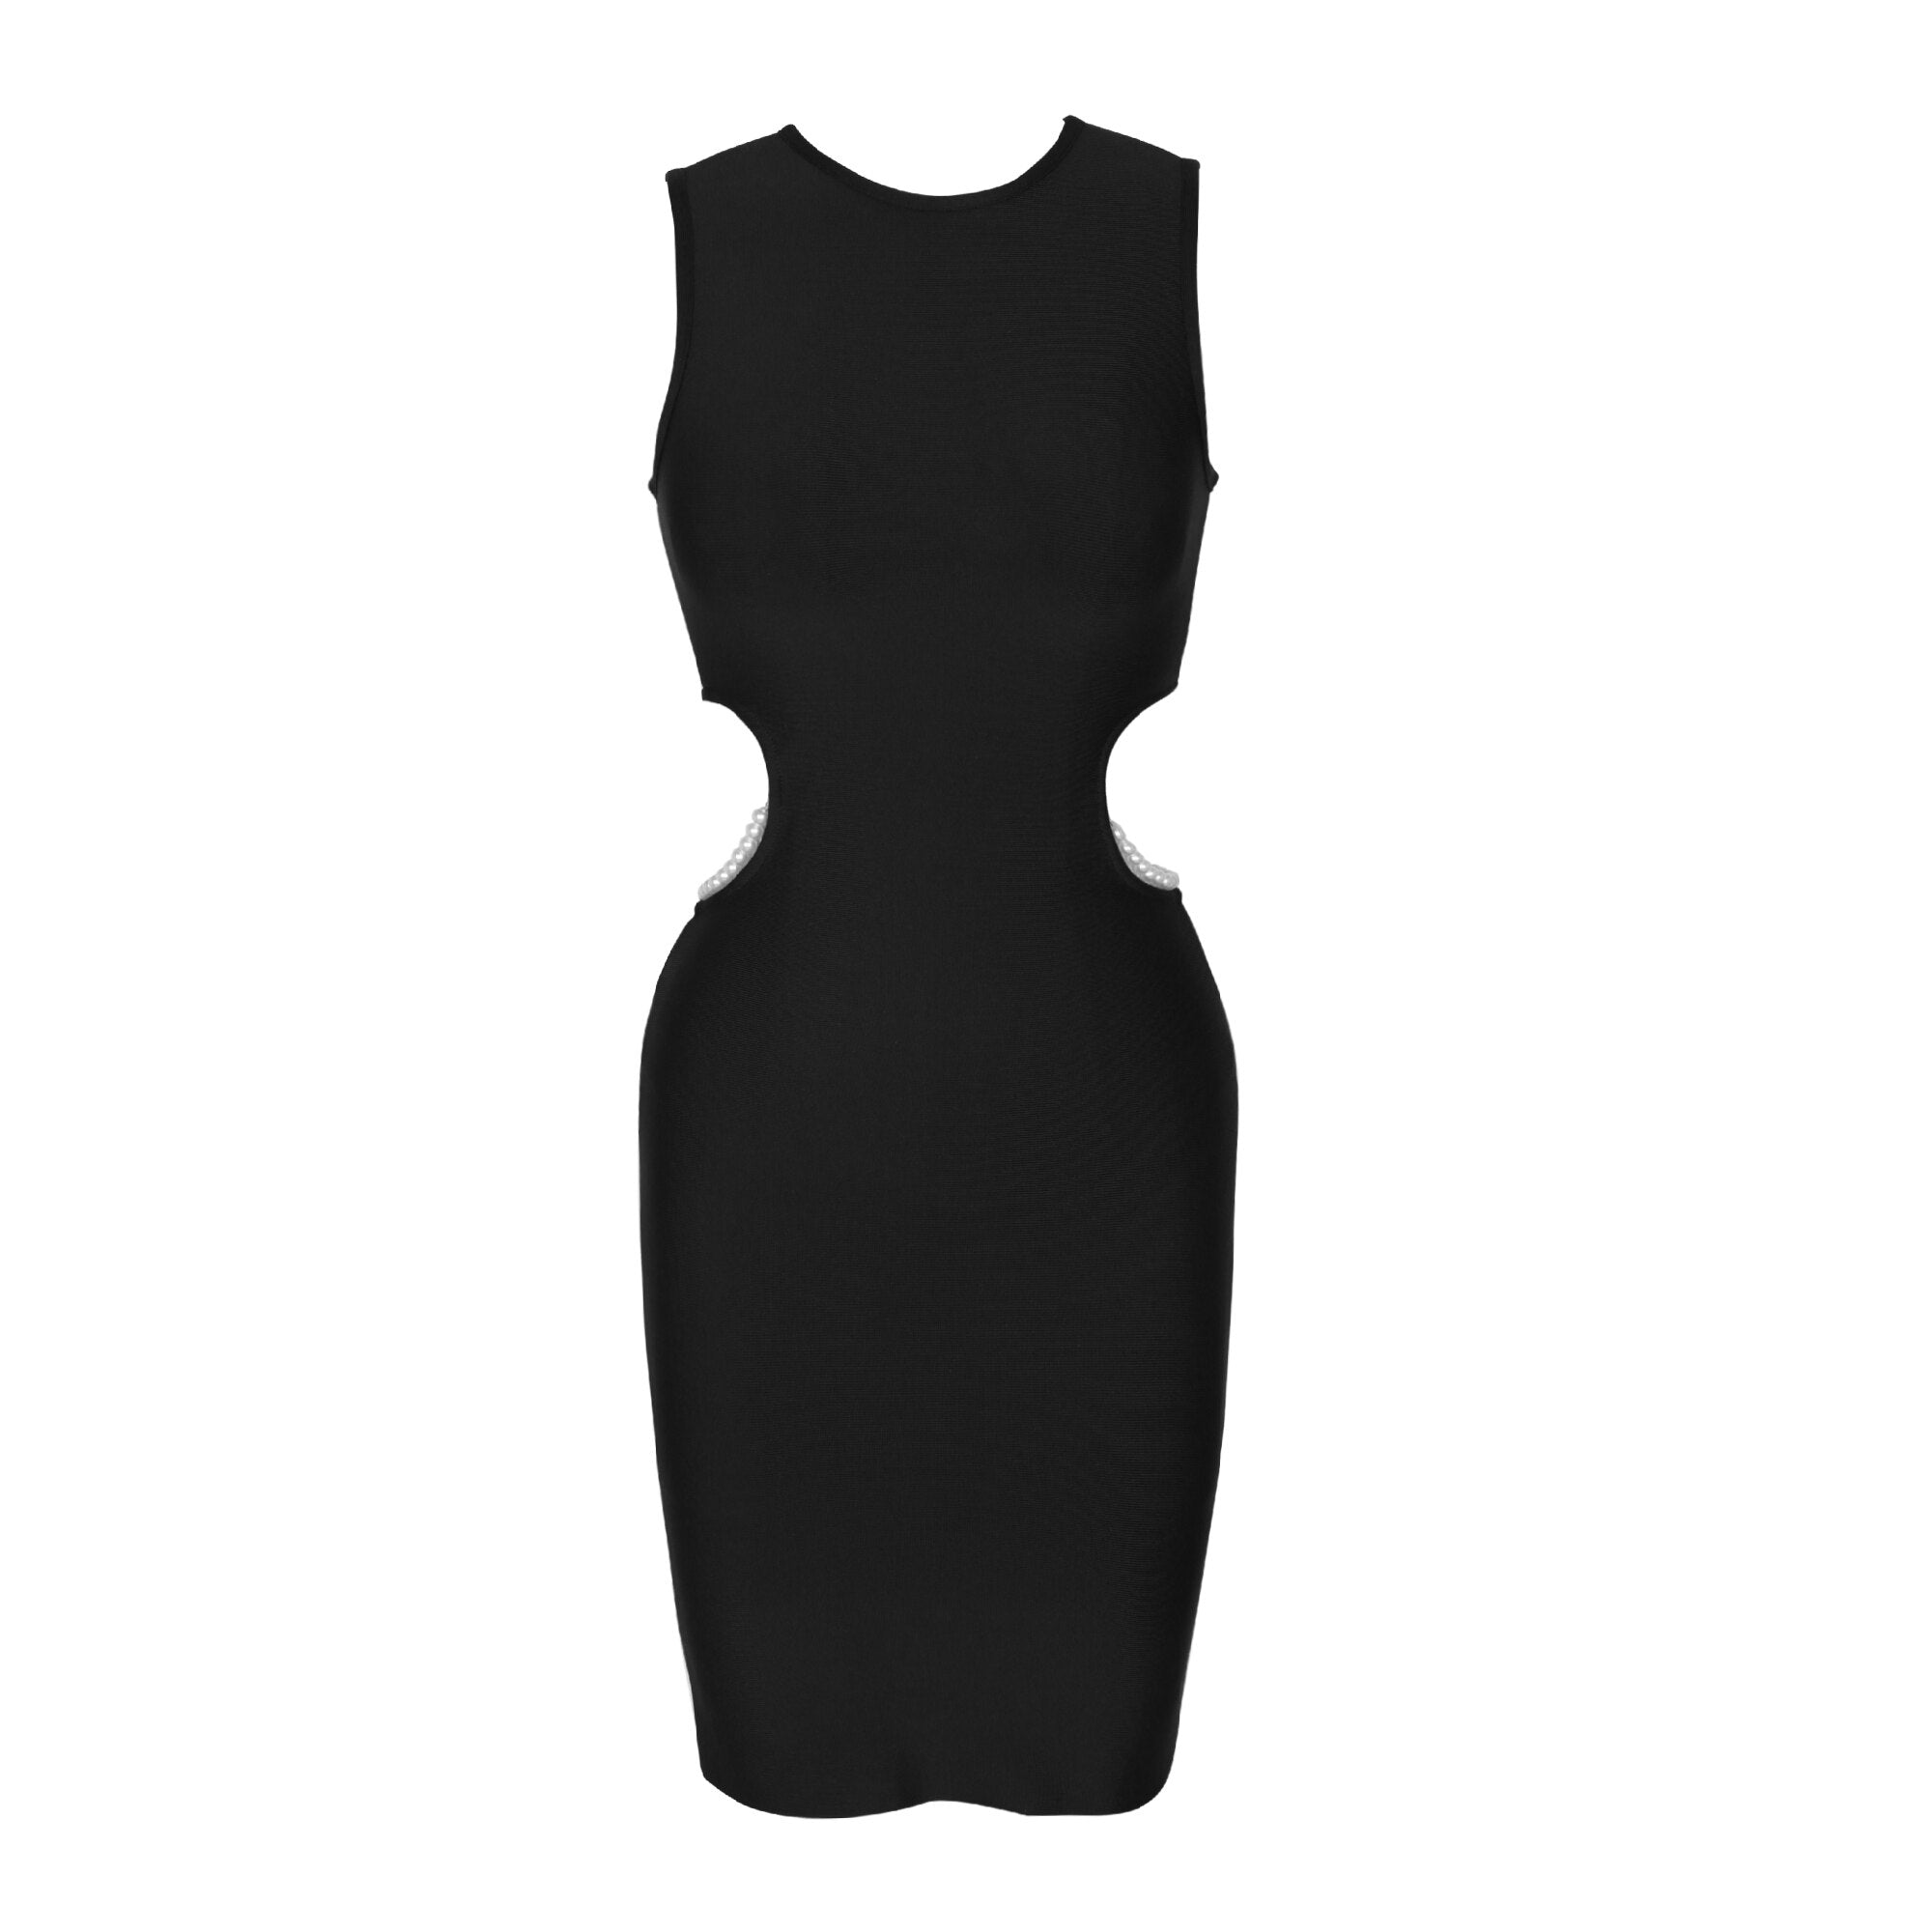 Bandage Dress 2021 New Arrival Black Bandage Dress Bodycon Women Summer Sexy Party Dress Wedding Evening Club Outfits